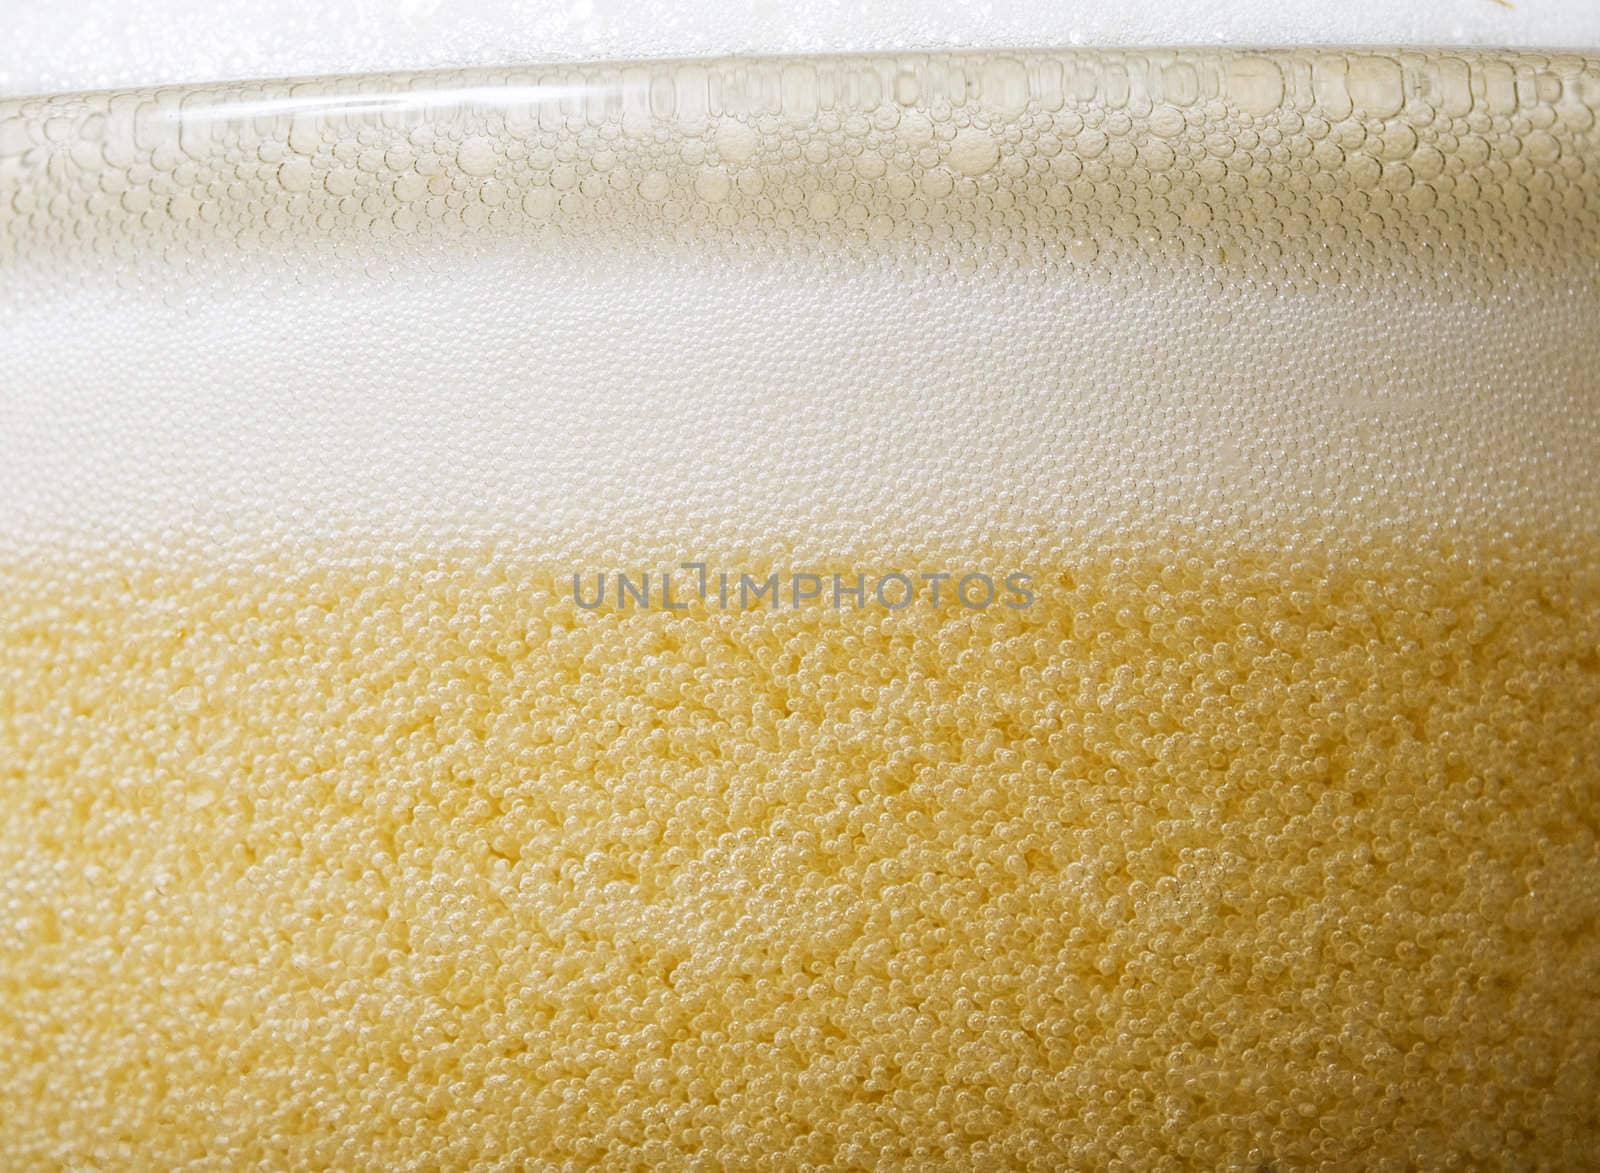 Macro shot of the top of a glass of beer with lots of foam and bubbles.